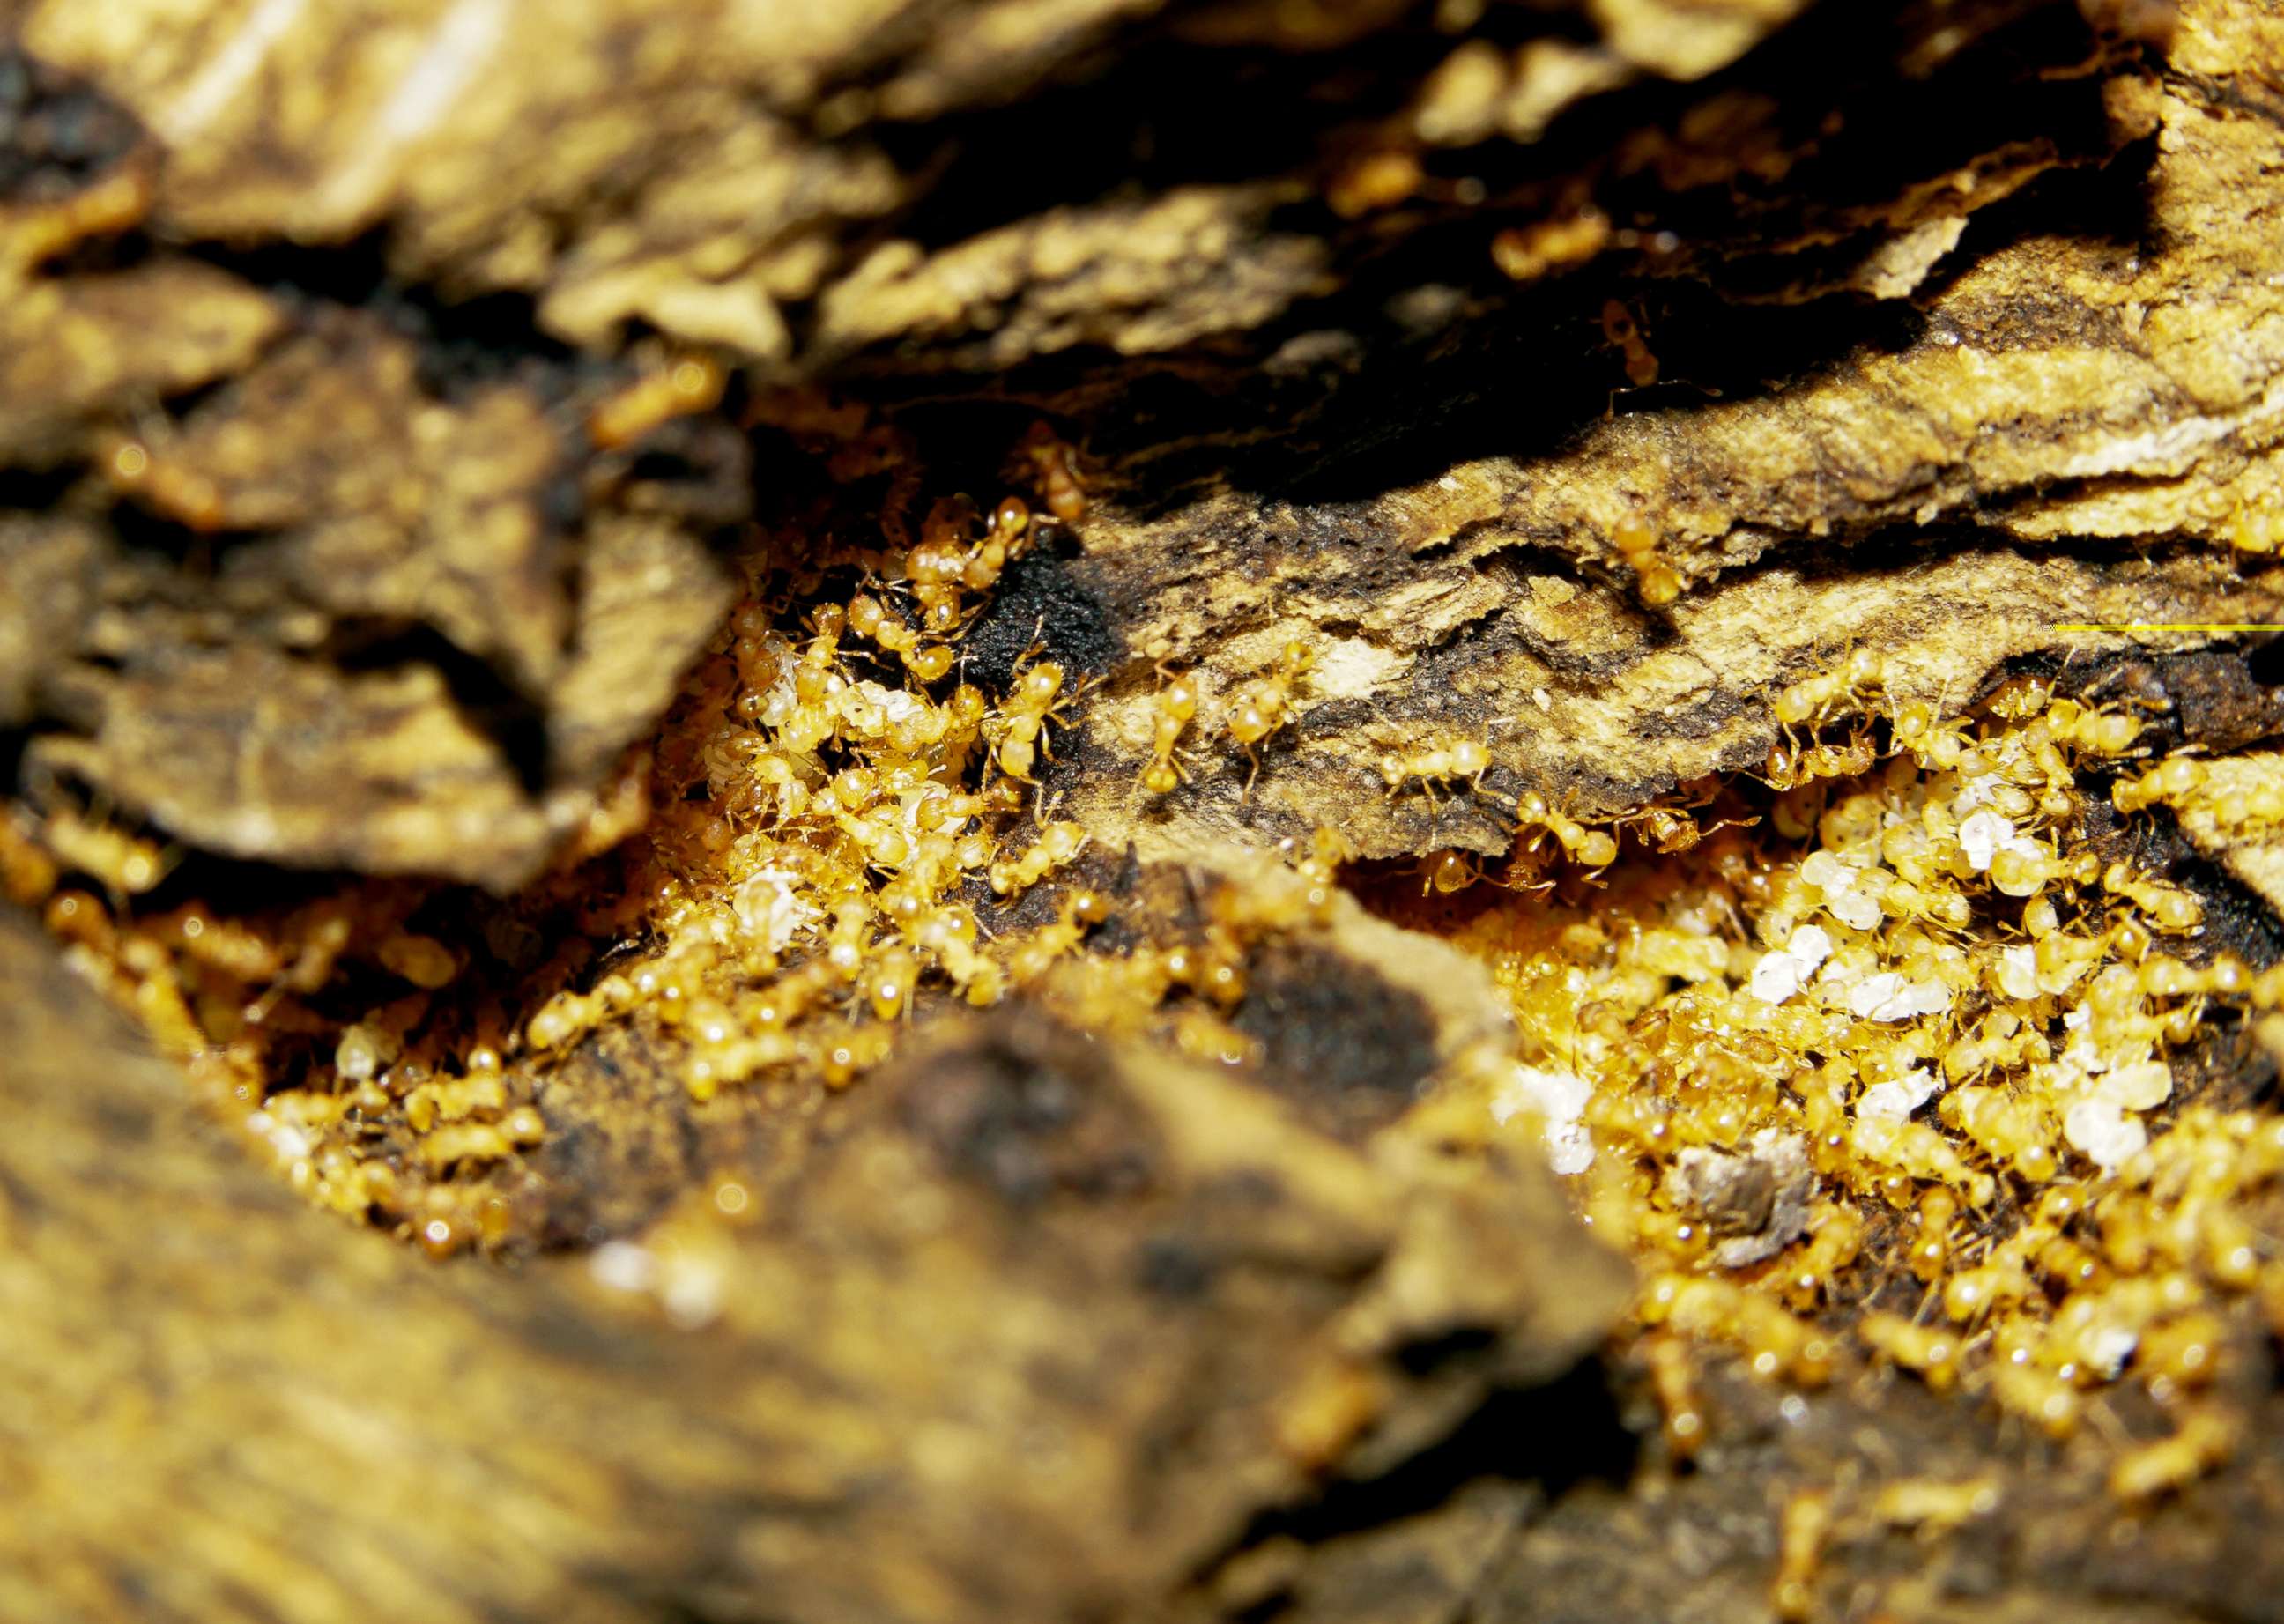 PHOTO: A fragment of a Wasmannia auropunctata fire ant colony nests within dead wood in an undated photo.